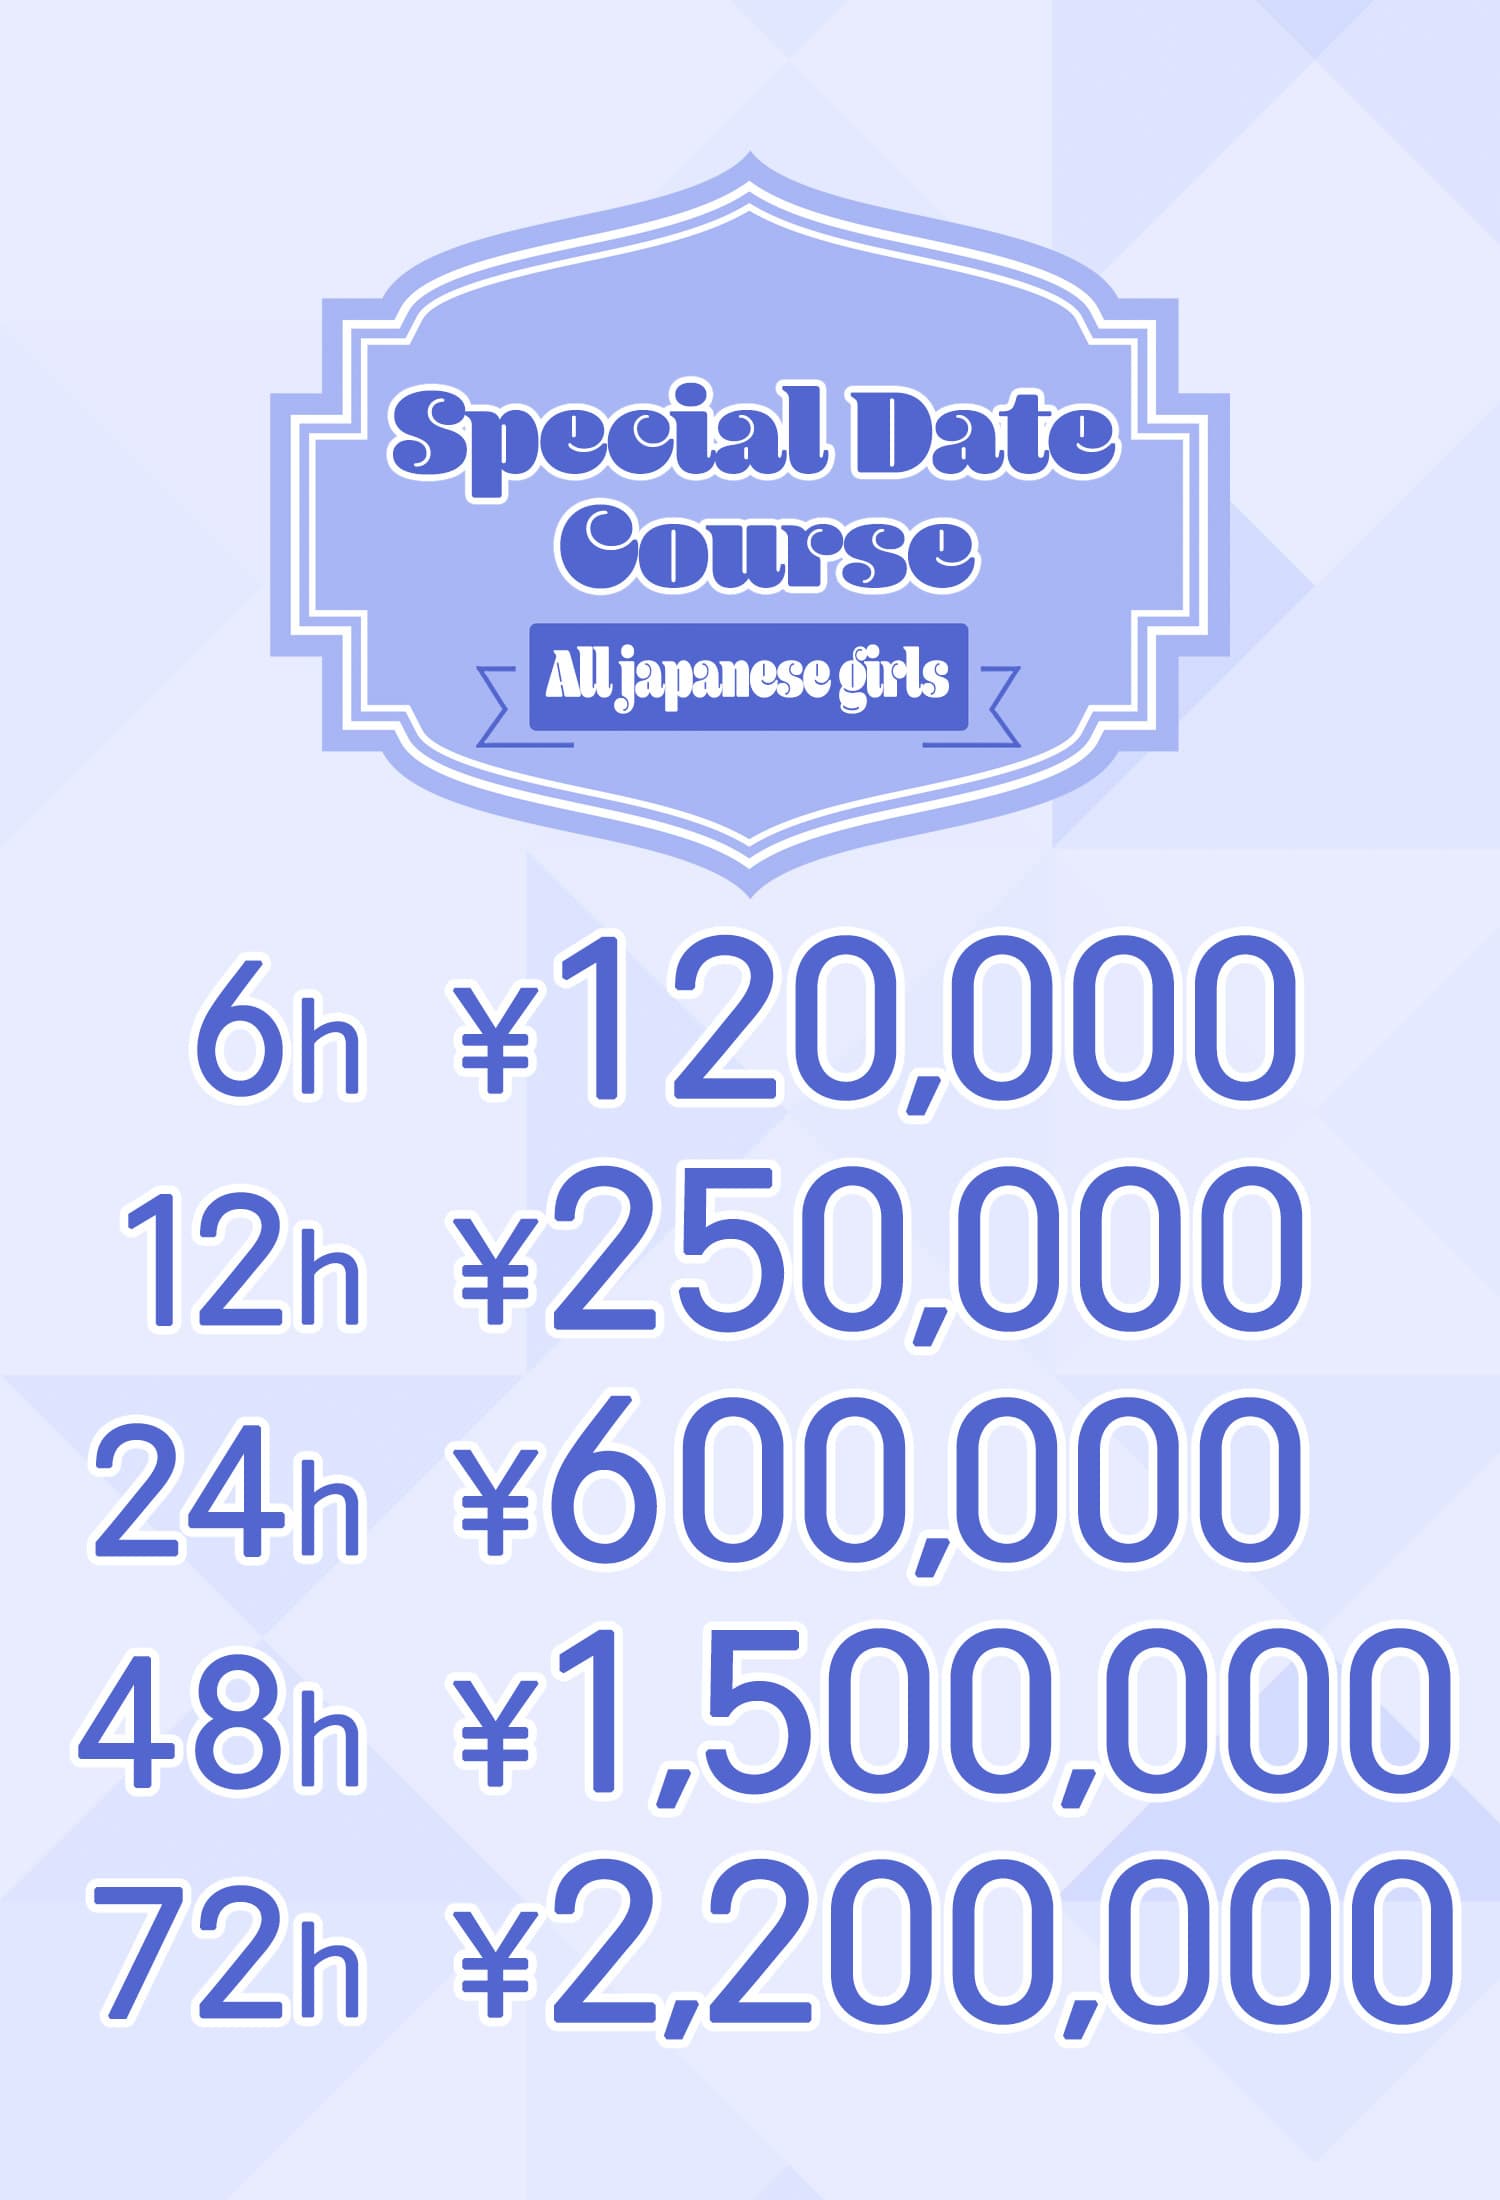 Special Date Course